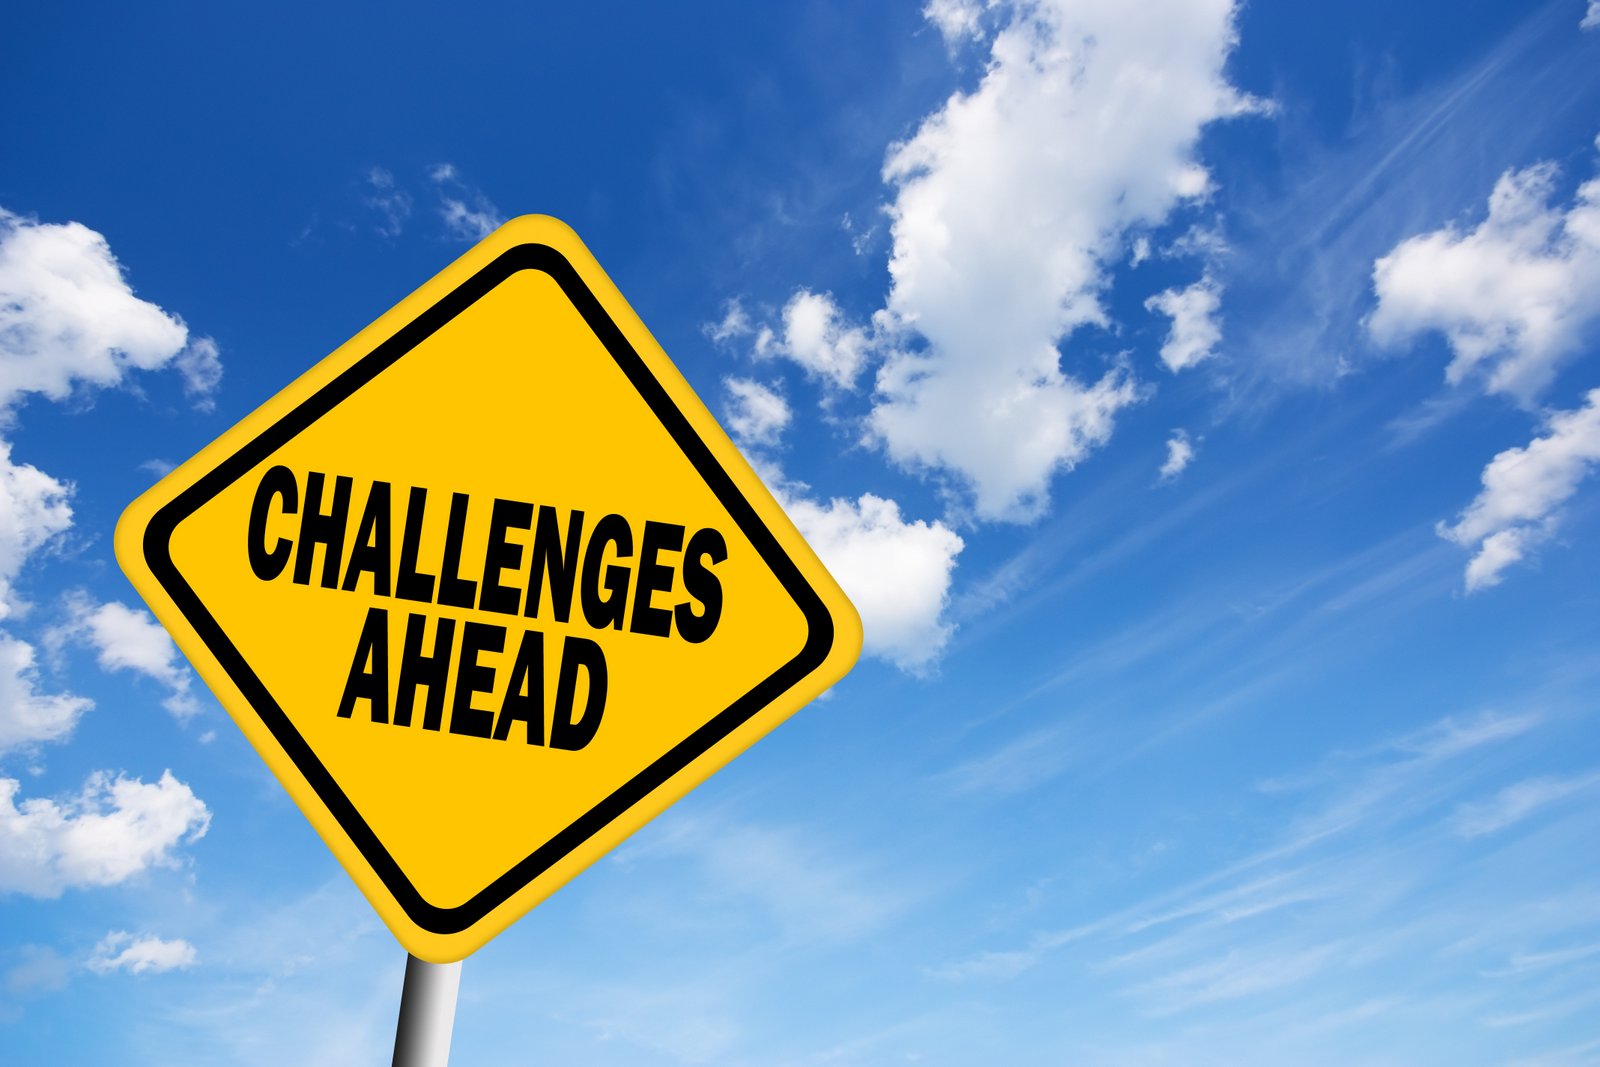 Challenges ahead sign